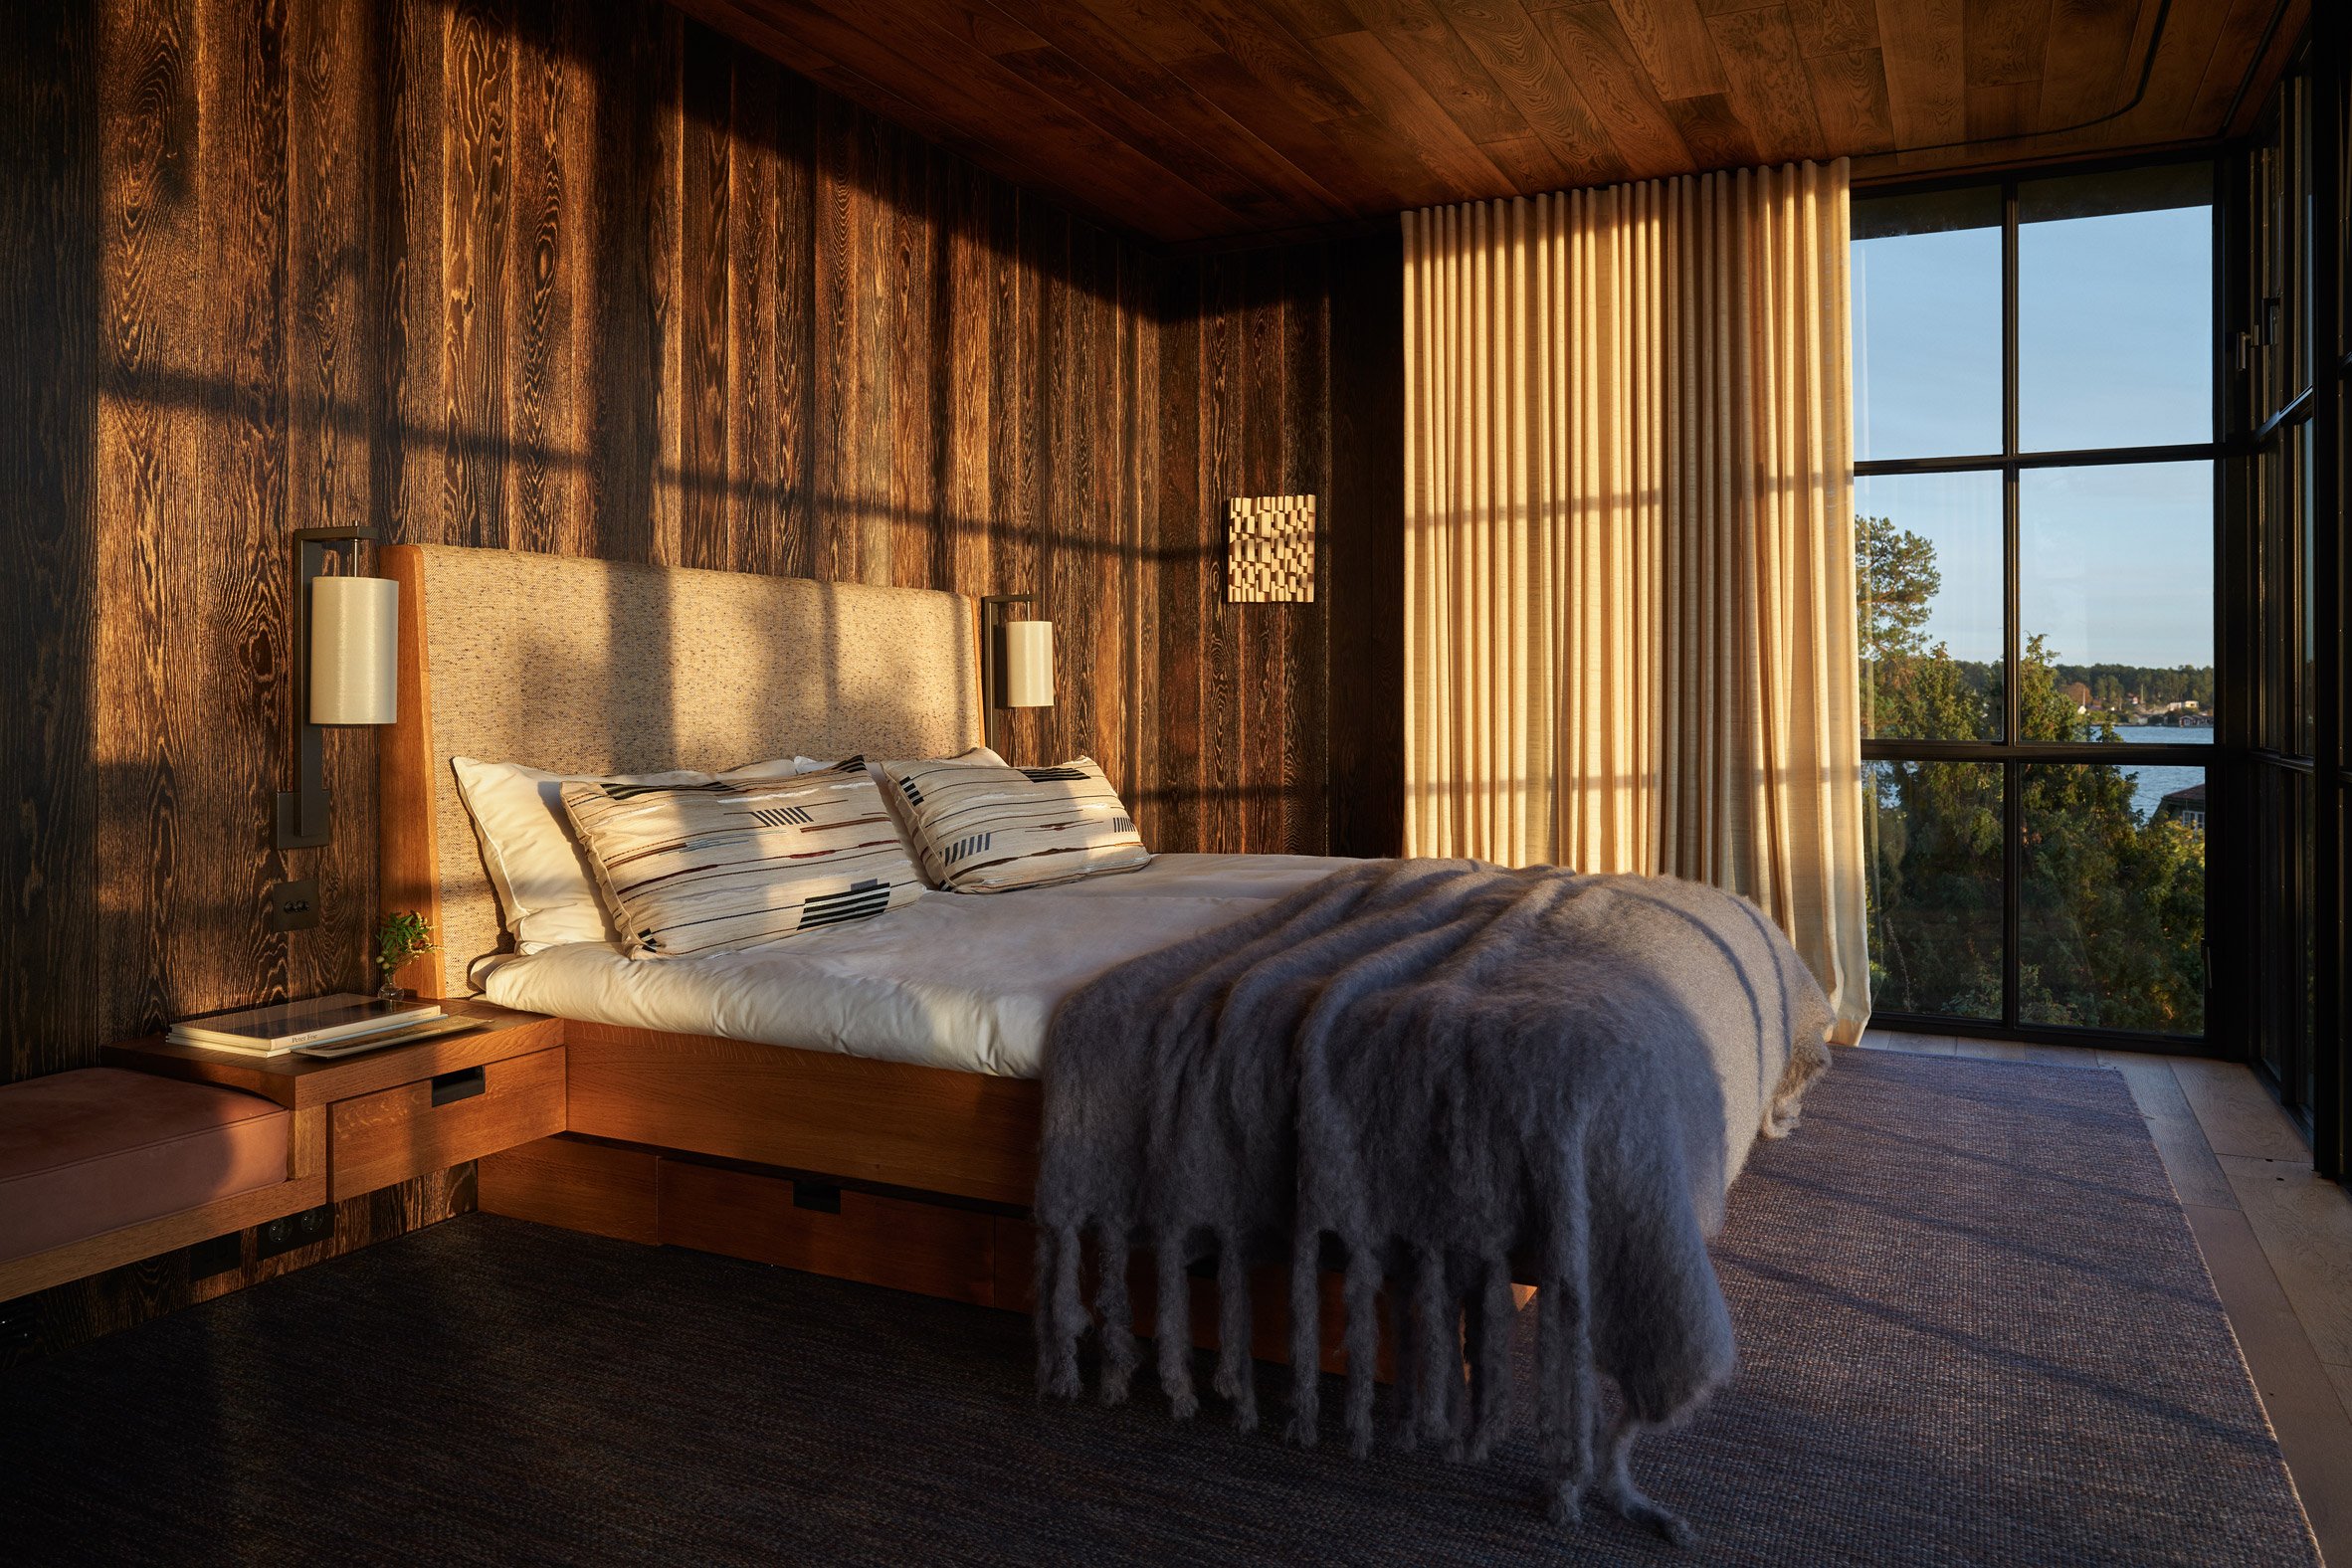 Photo of a bedroom at the summer house